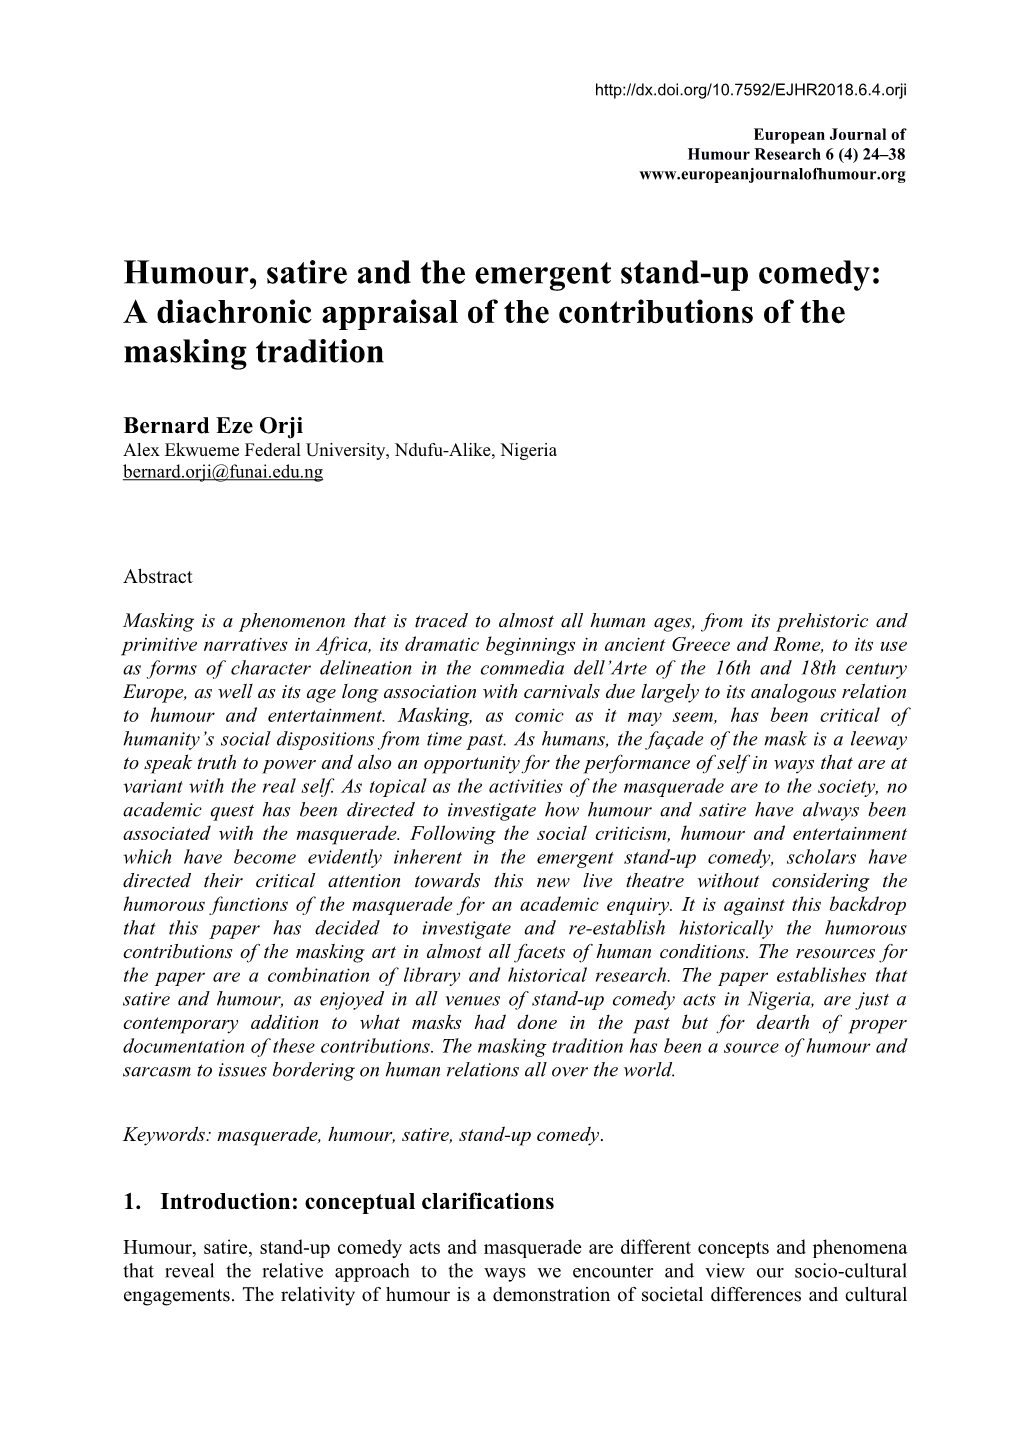 Humour, Satire and the Emergent Stand-Up Comedy: a Diachronic Appraisal of the Contributions of the Masking Tradition